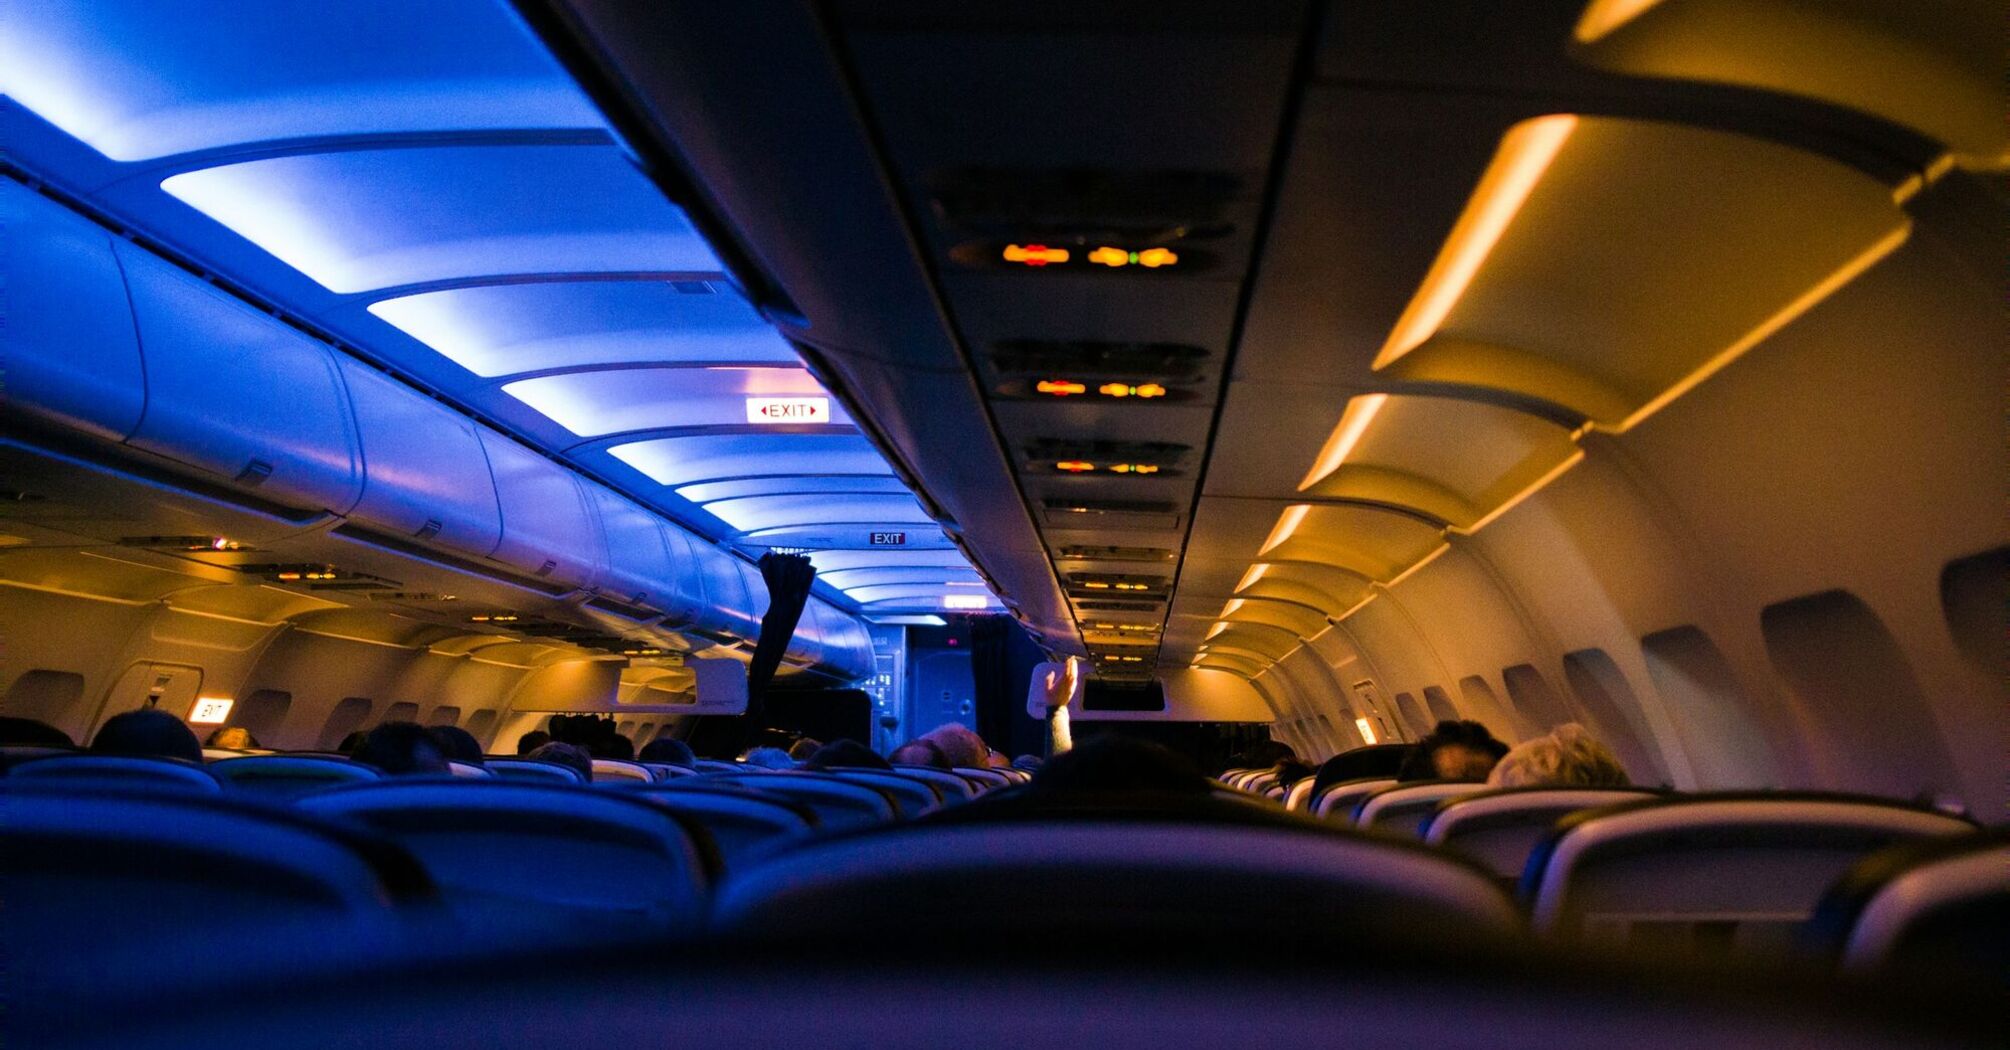 The interior of an airplane cabin at night with ambient blue overhead lighting and rows of unoccupied seats leading towards the exit sign 